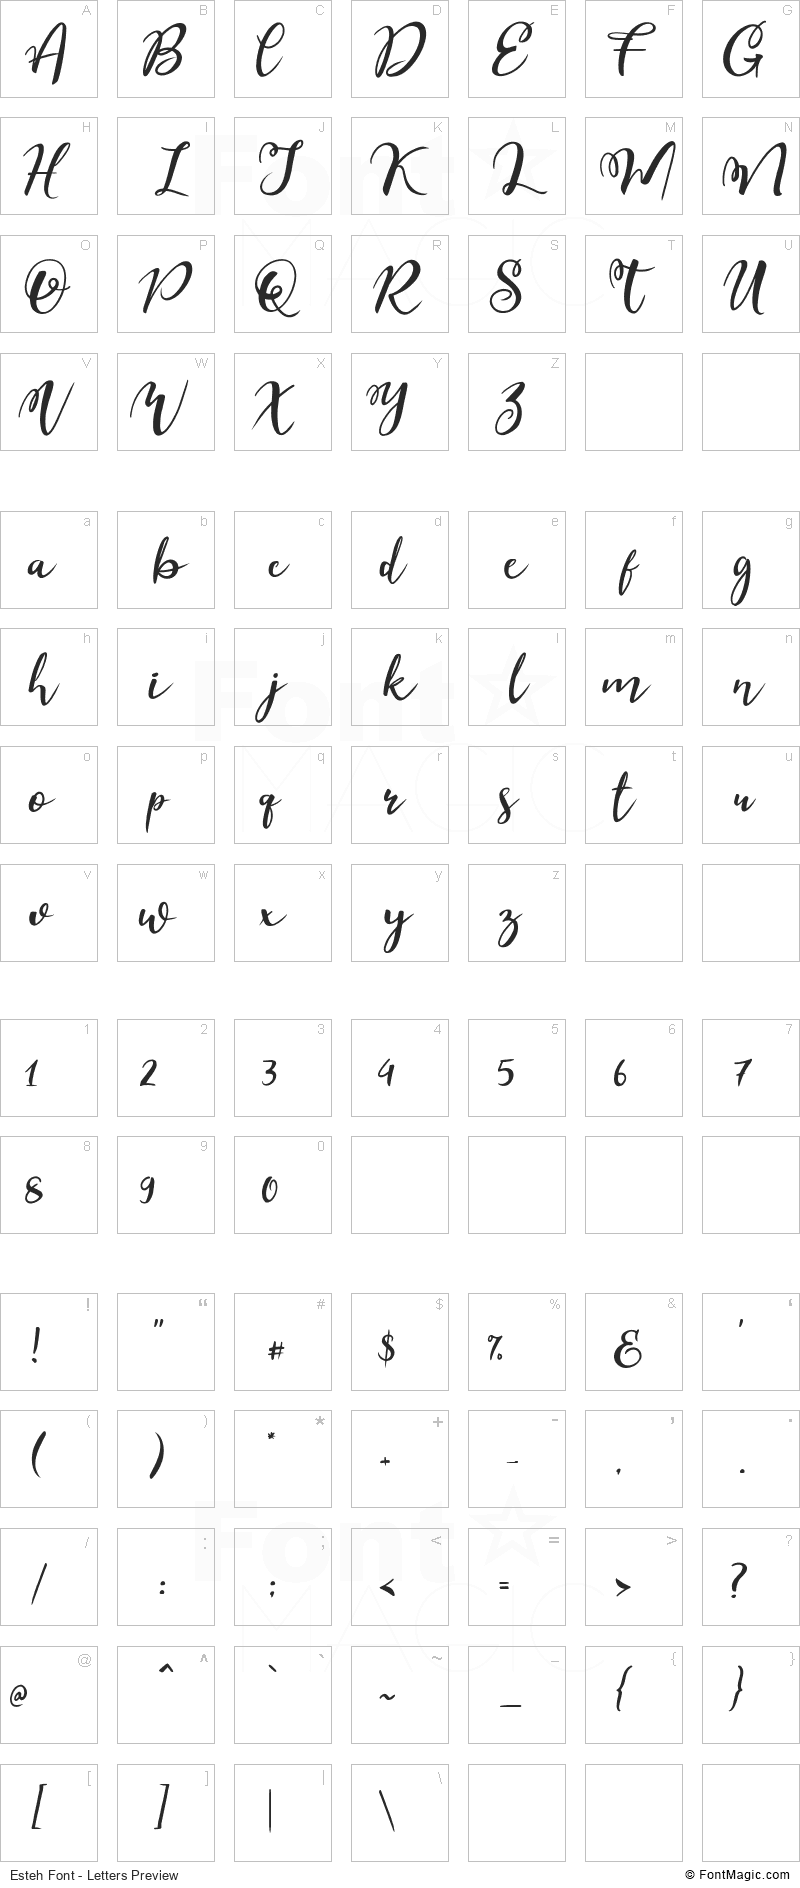 Esteh Font - All Latters Preview Chart